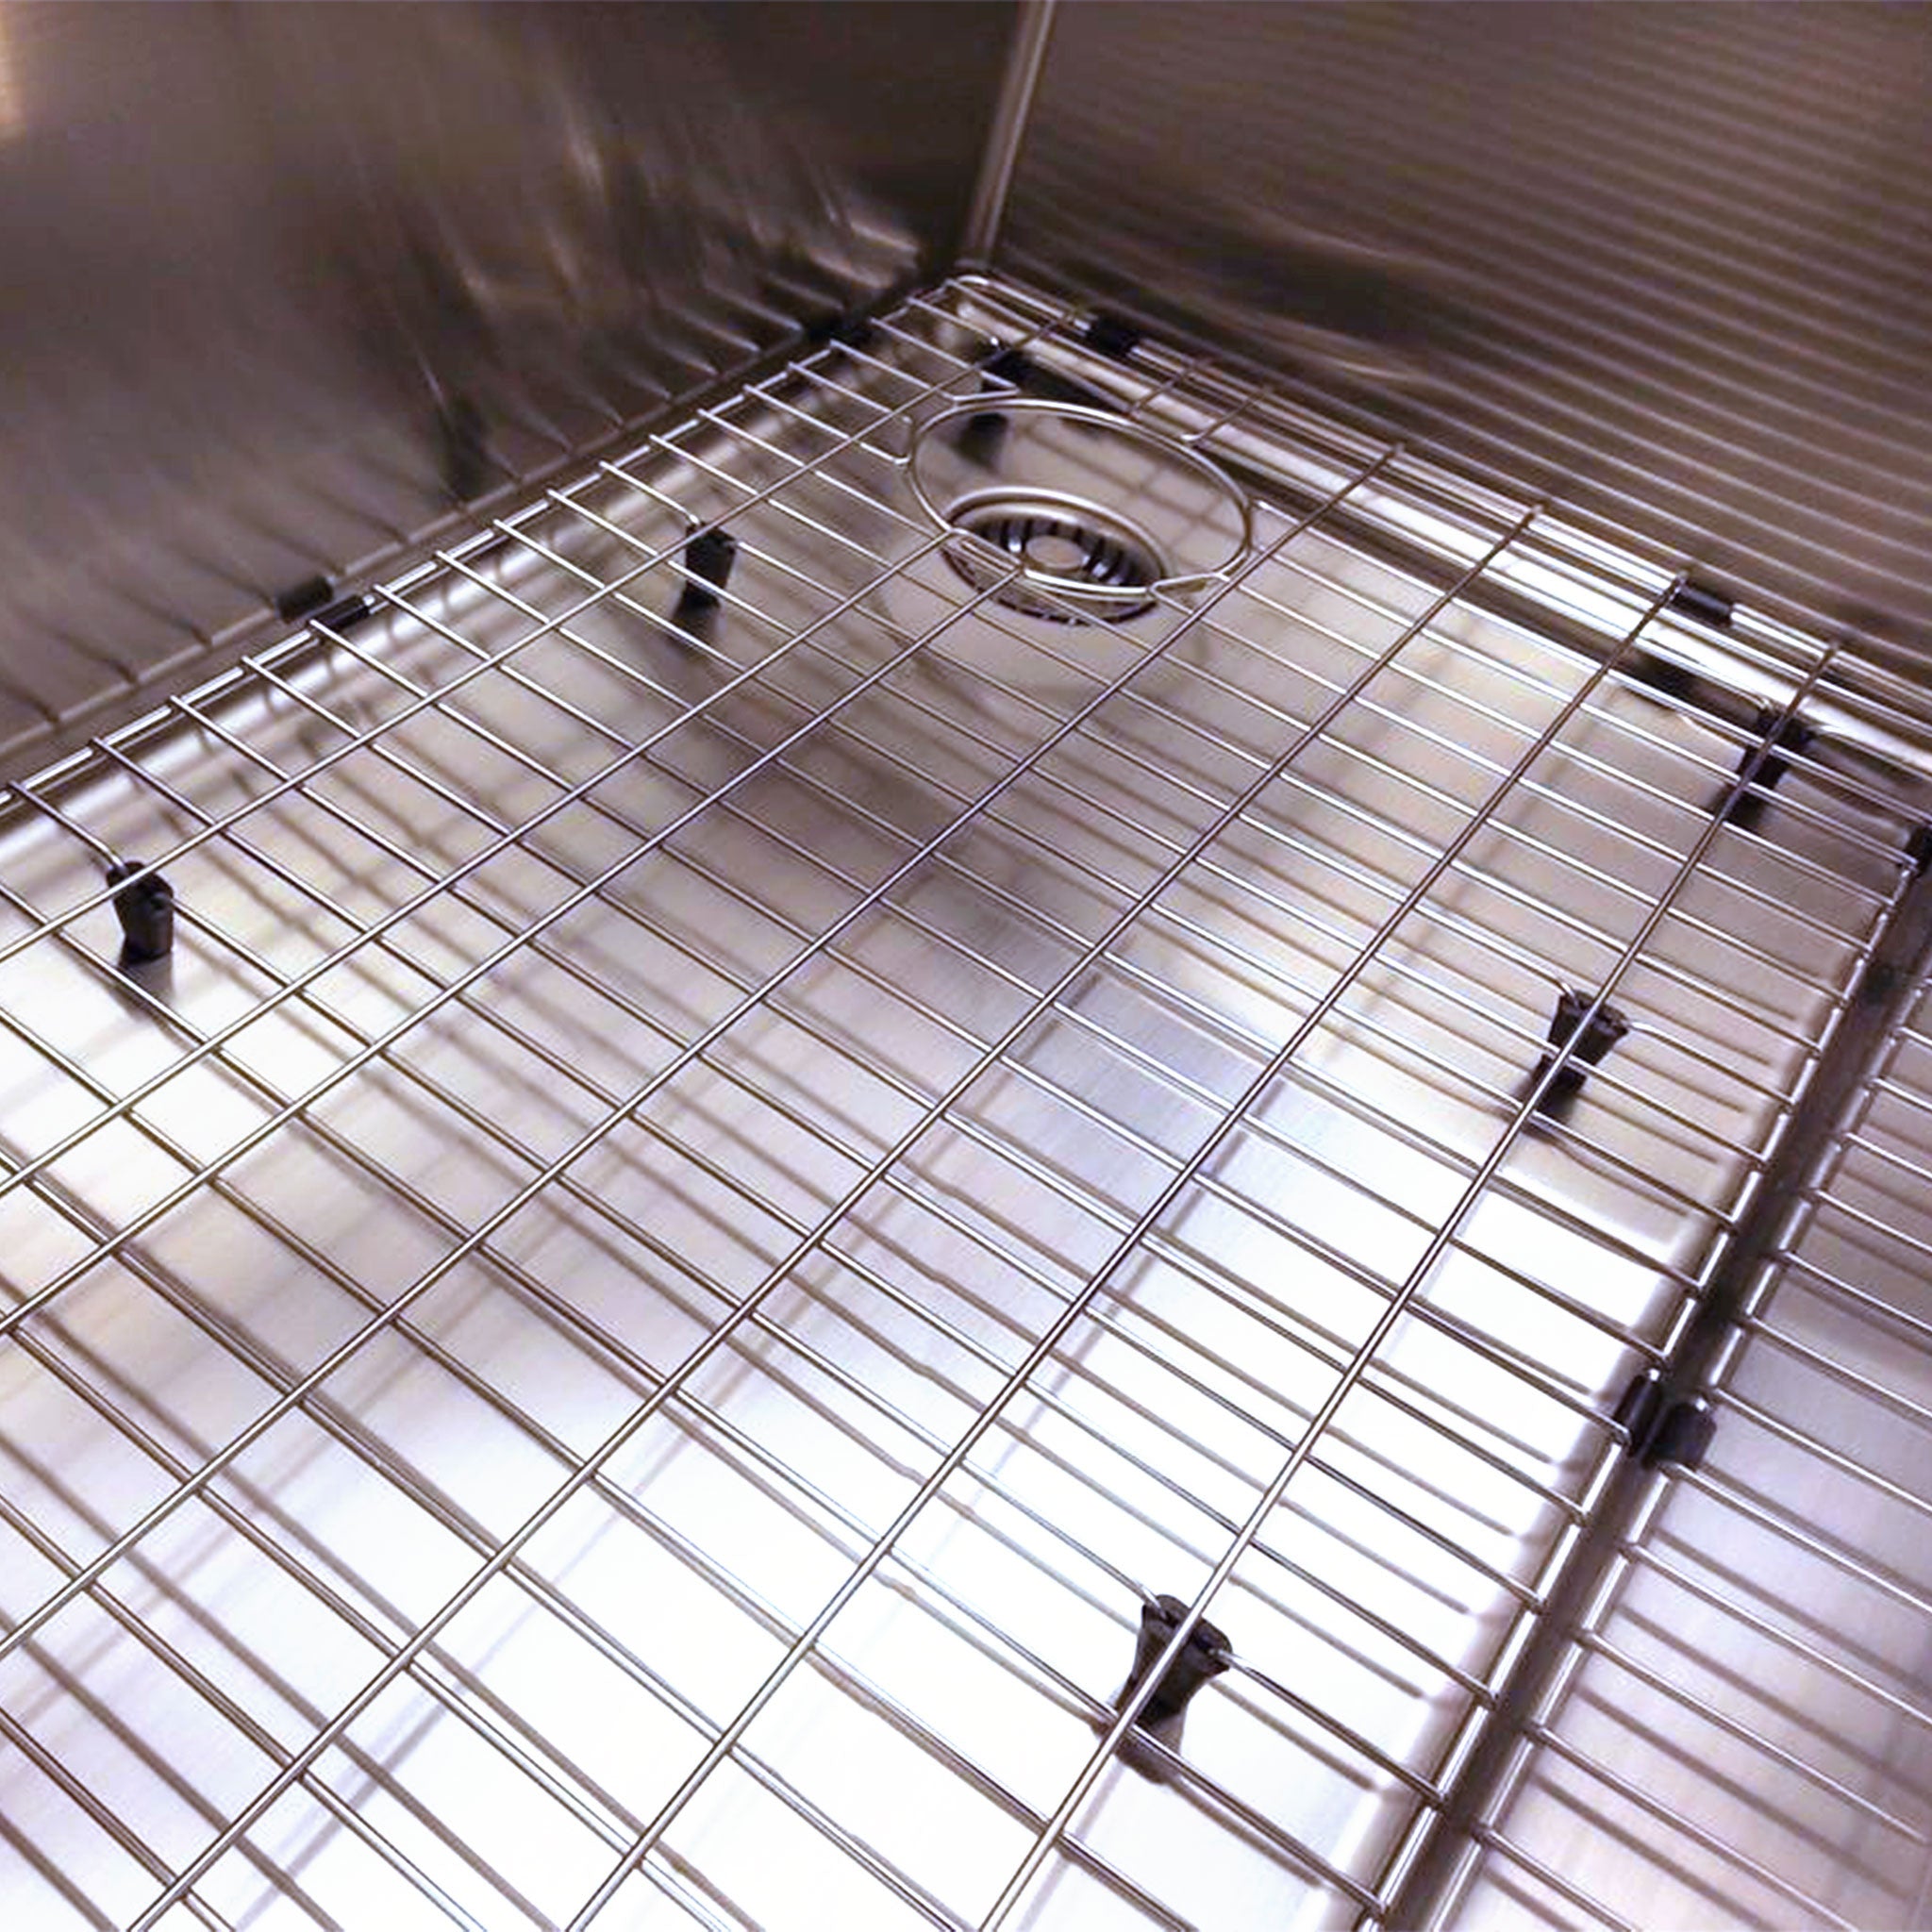 GRID Apron 37" stainless steel sink grid - right drain